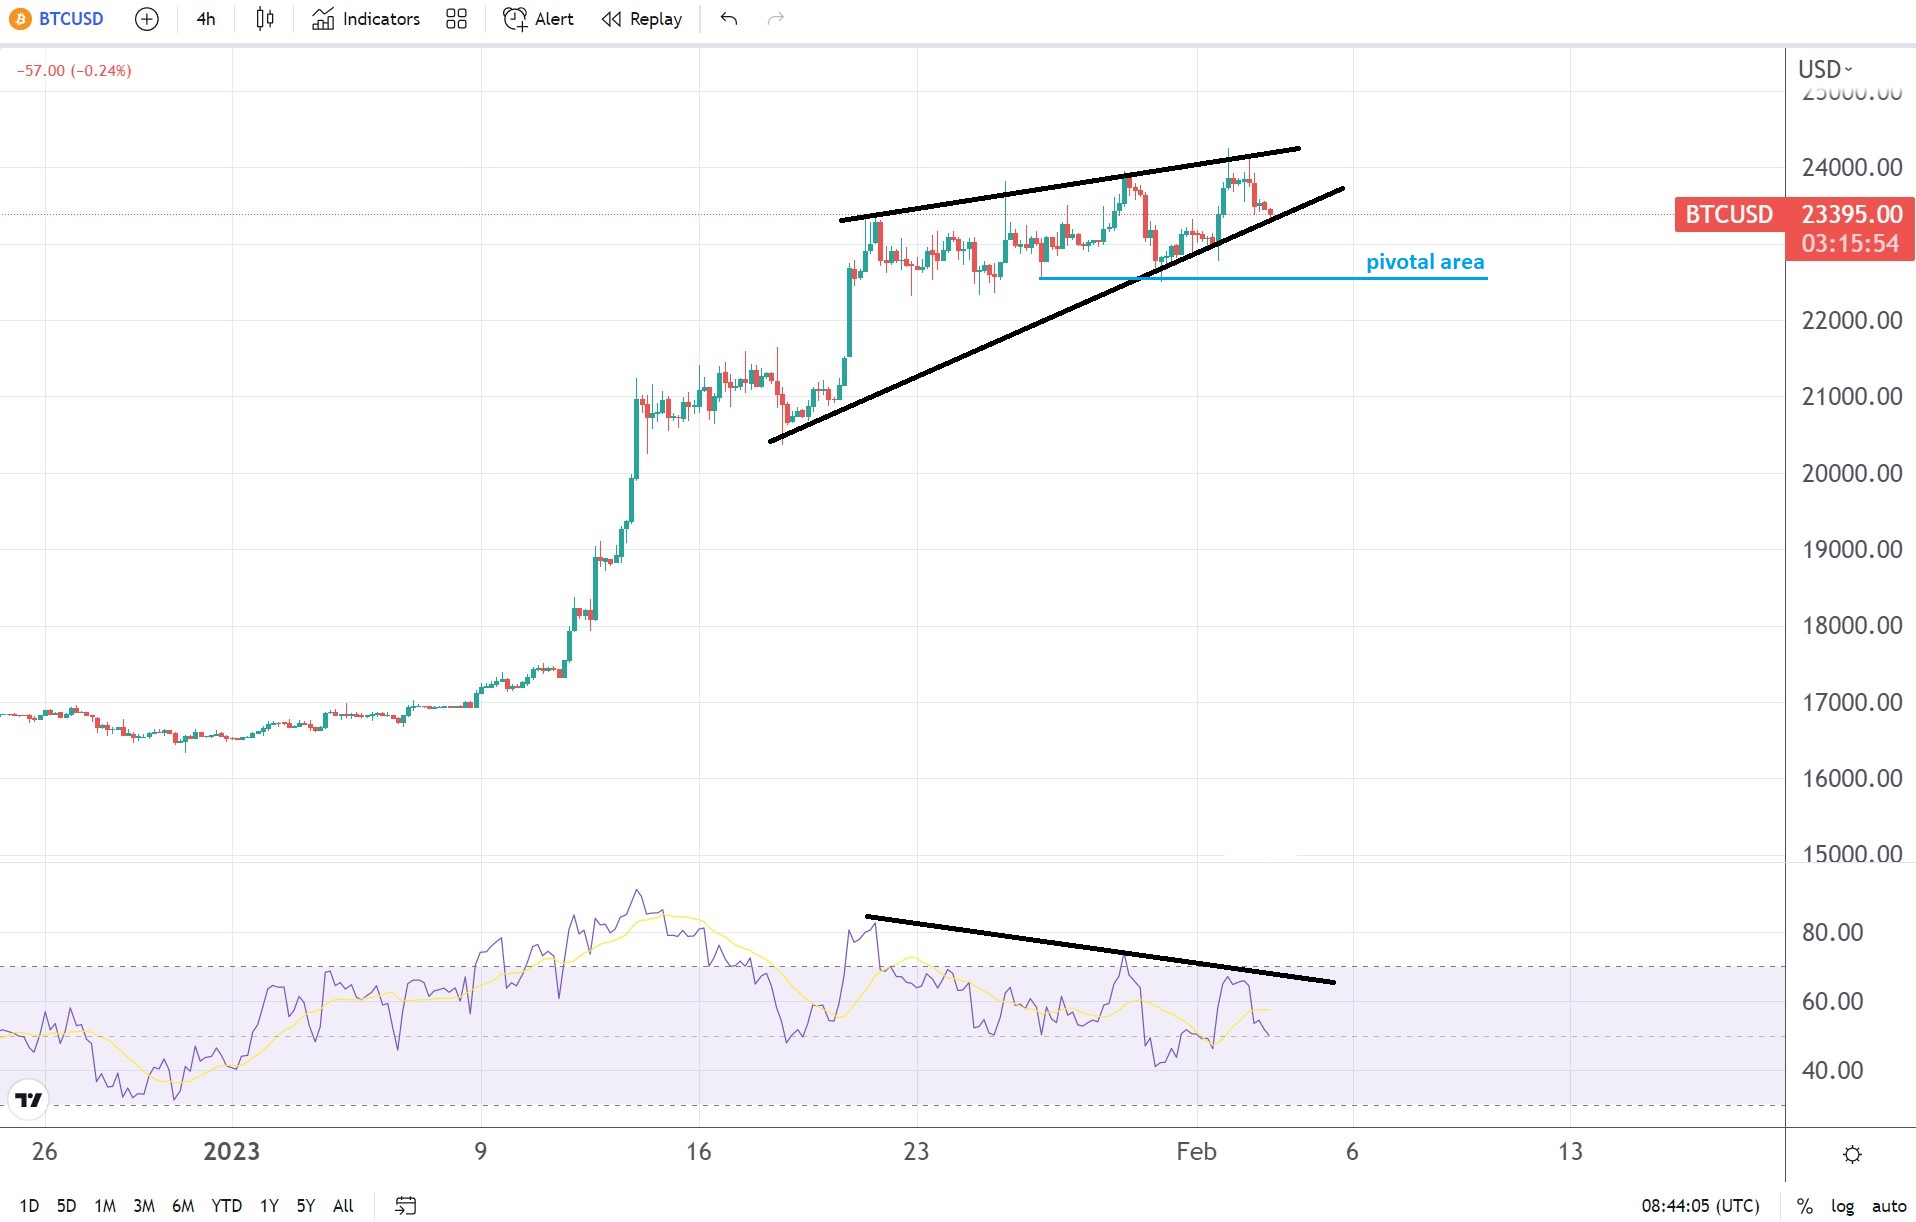 BTC/USD price forecast following the Feds decision